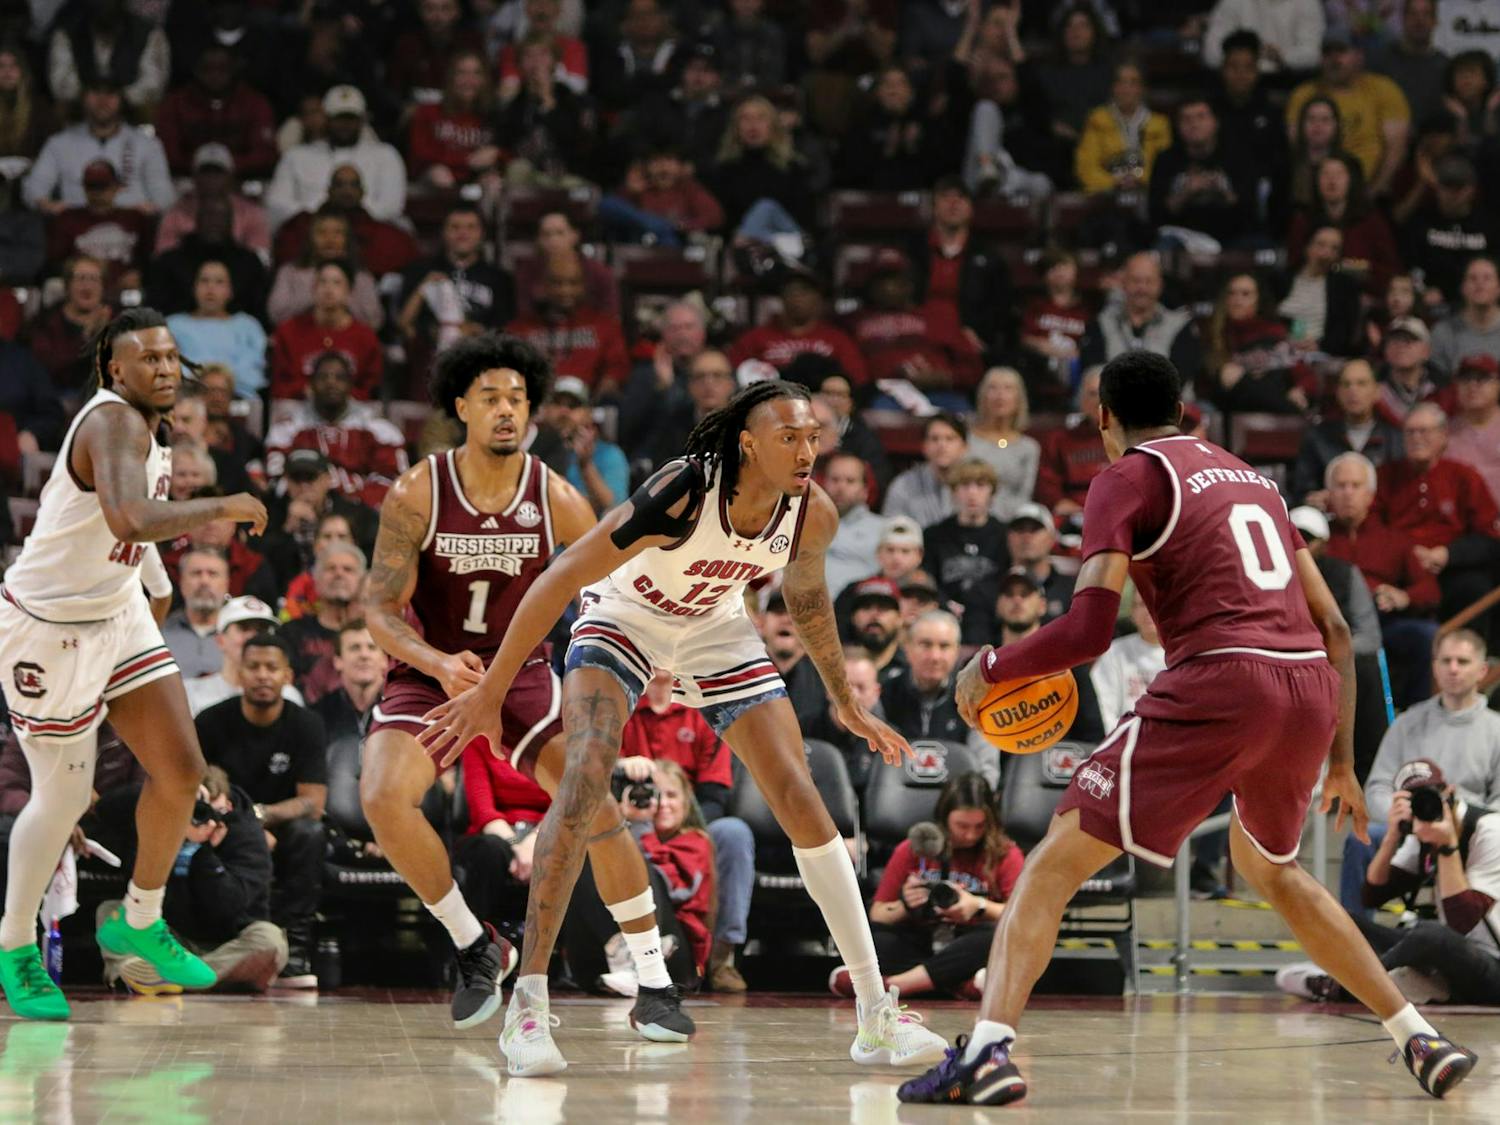 Sophomore guard Zachary Davis watches the ball as he plays defense on Jan 6, 2024. Davis finished the game with 9 points, aiding the 68-62 win against Mississippi State. The Gamecocks are now 13-1 for the sixth time in school history.